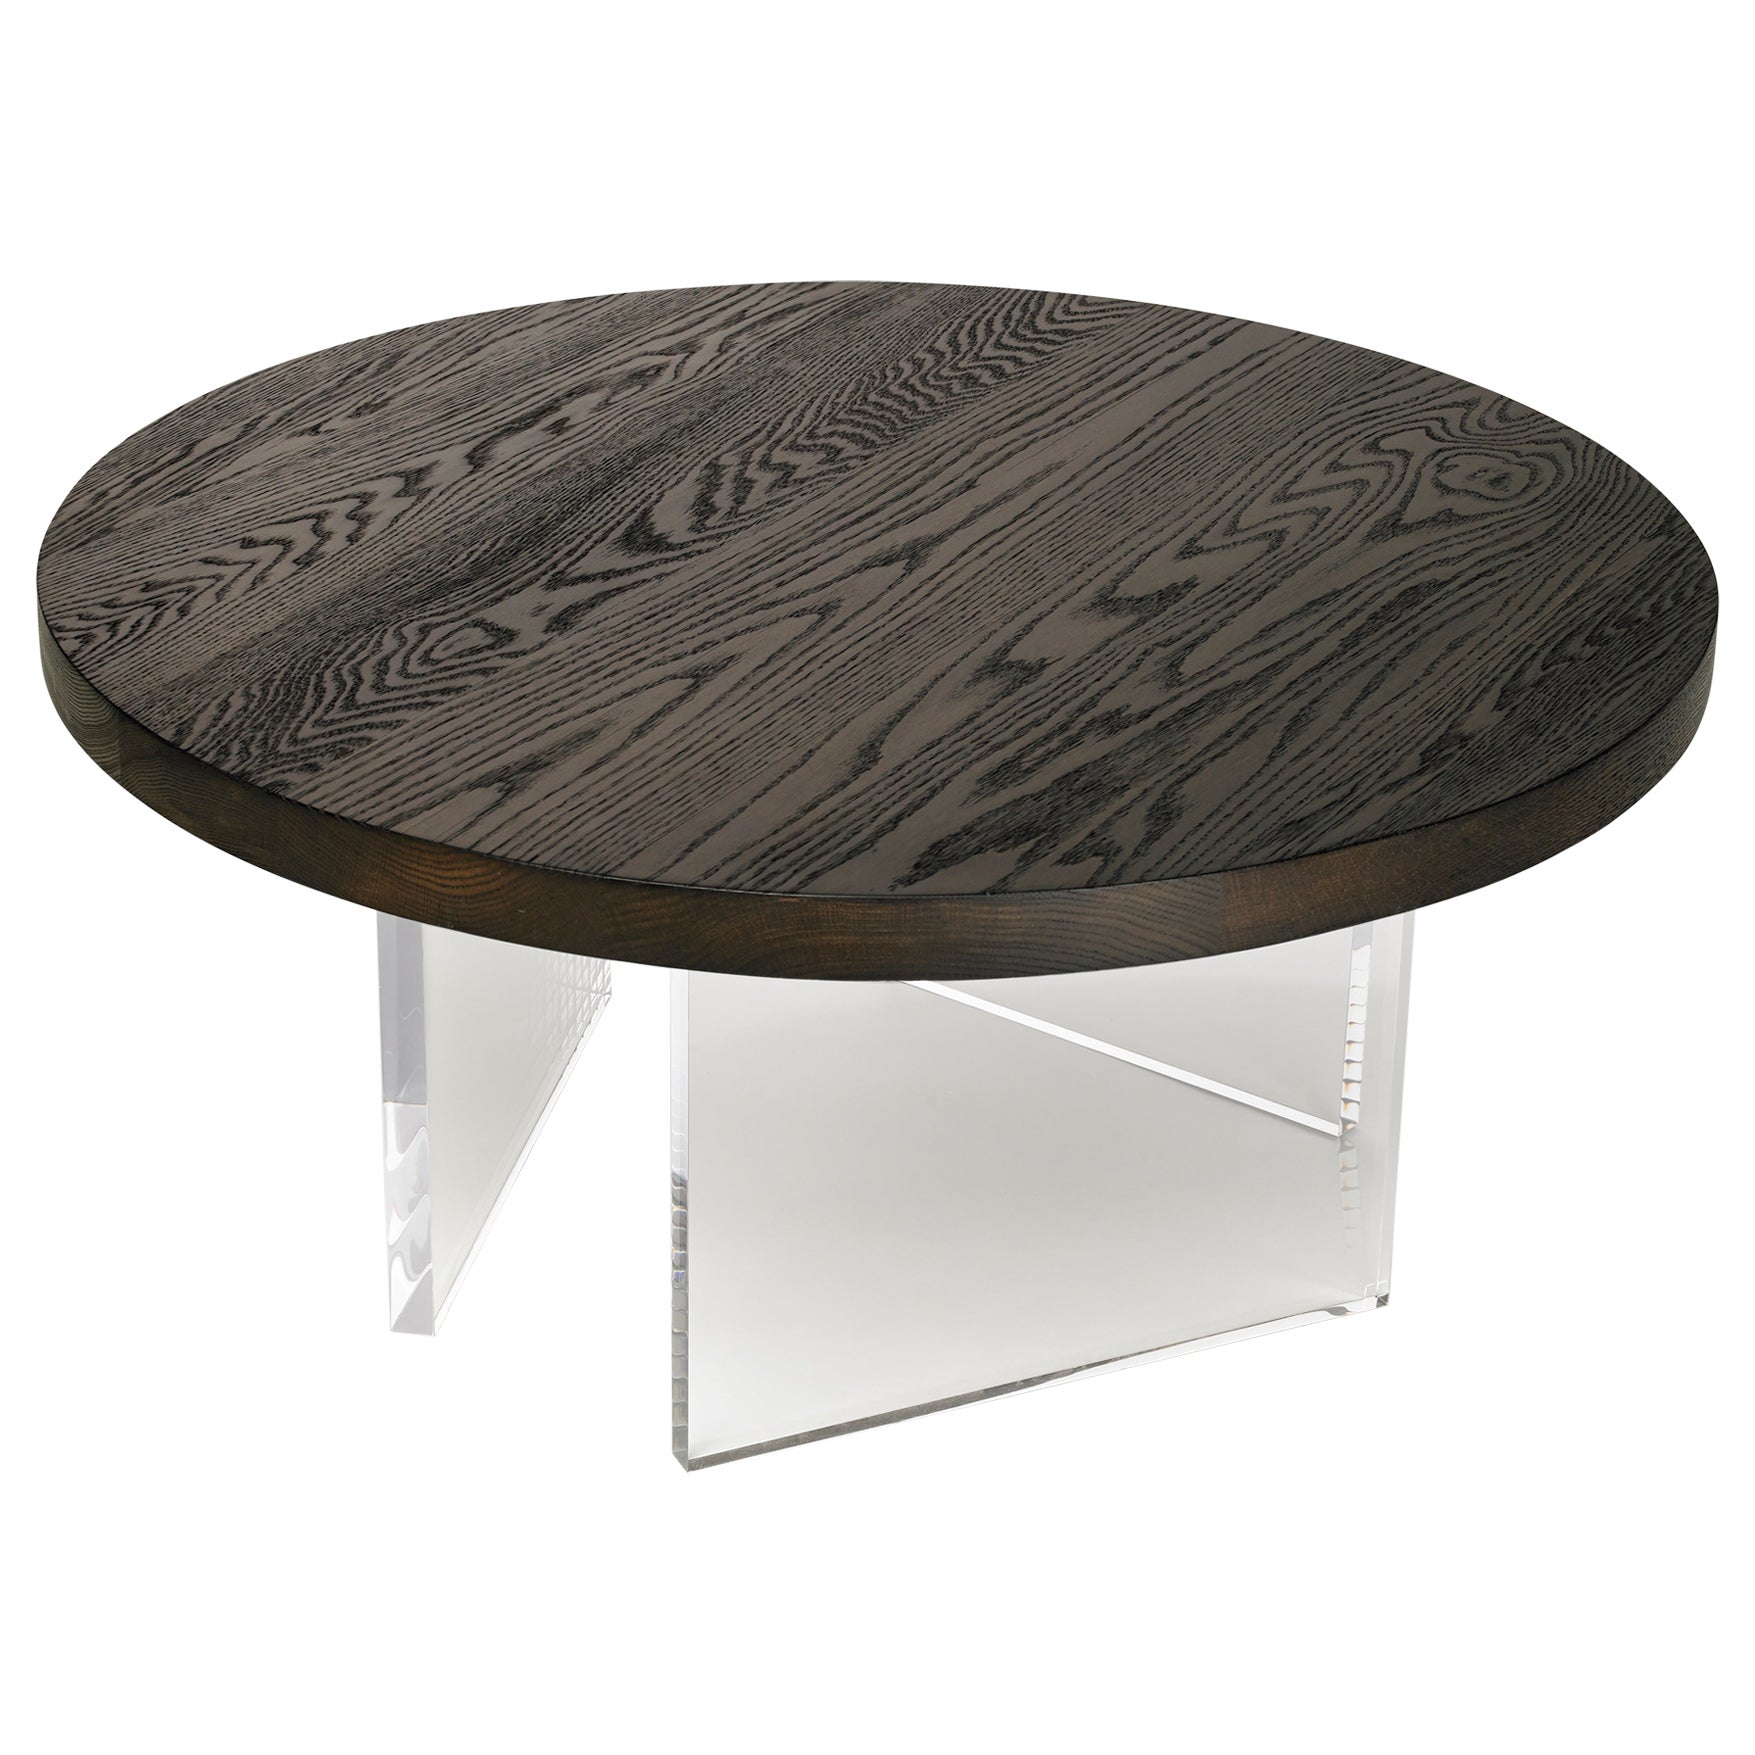 Constantinople Round Wood Coffee Table in Torched Oak by Autonomous Furniture